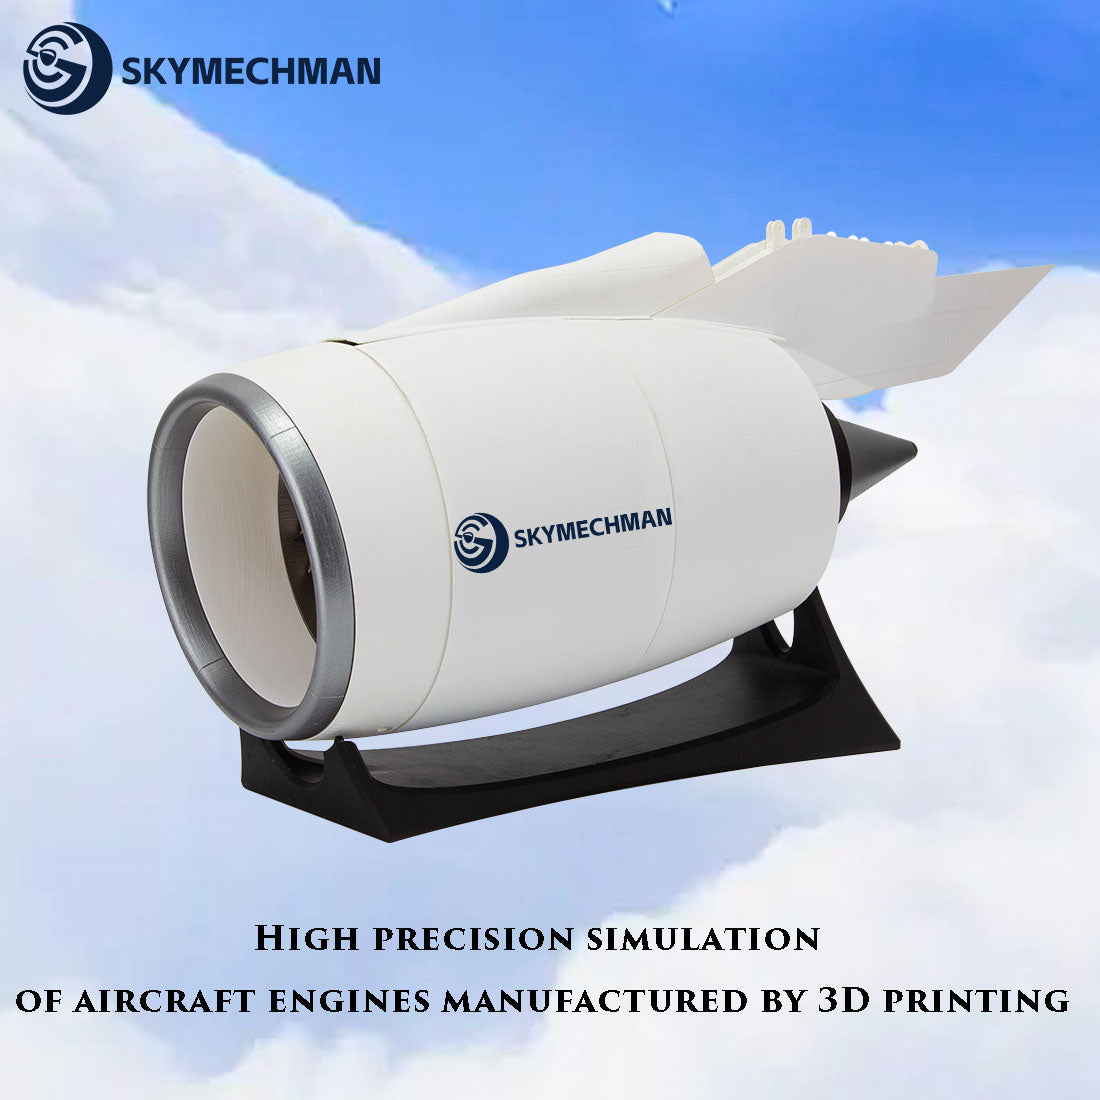 SkyMechman NTR-900 Building a 1/30 Turbofan Engine Model Kit - Build Your Own High Bypass Engine Nacelle that Works - stirlingkit